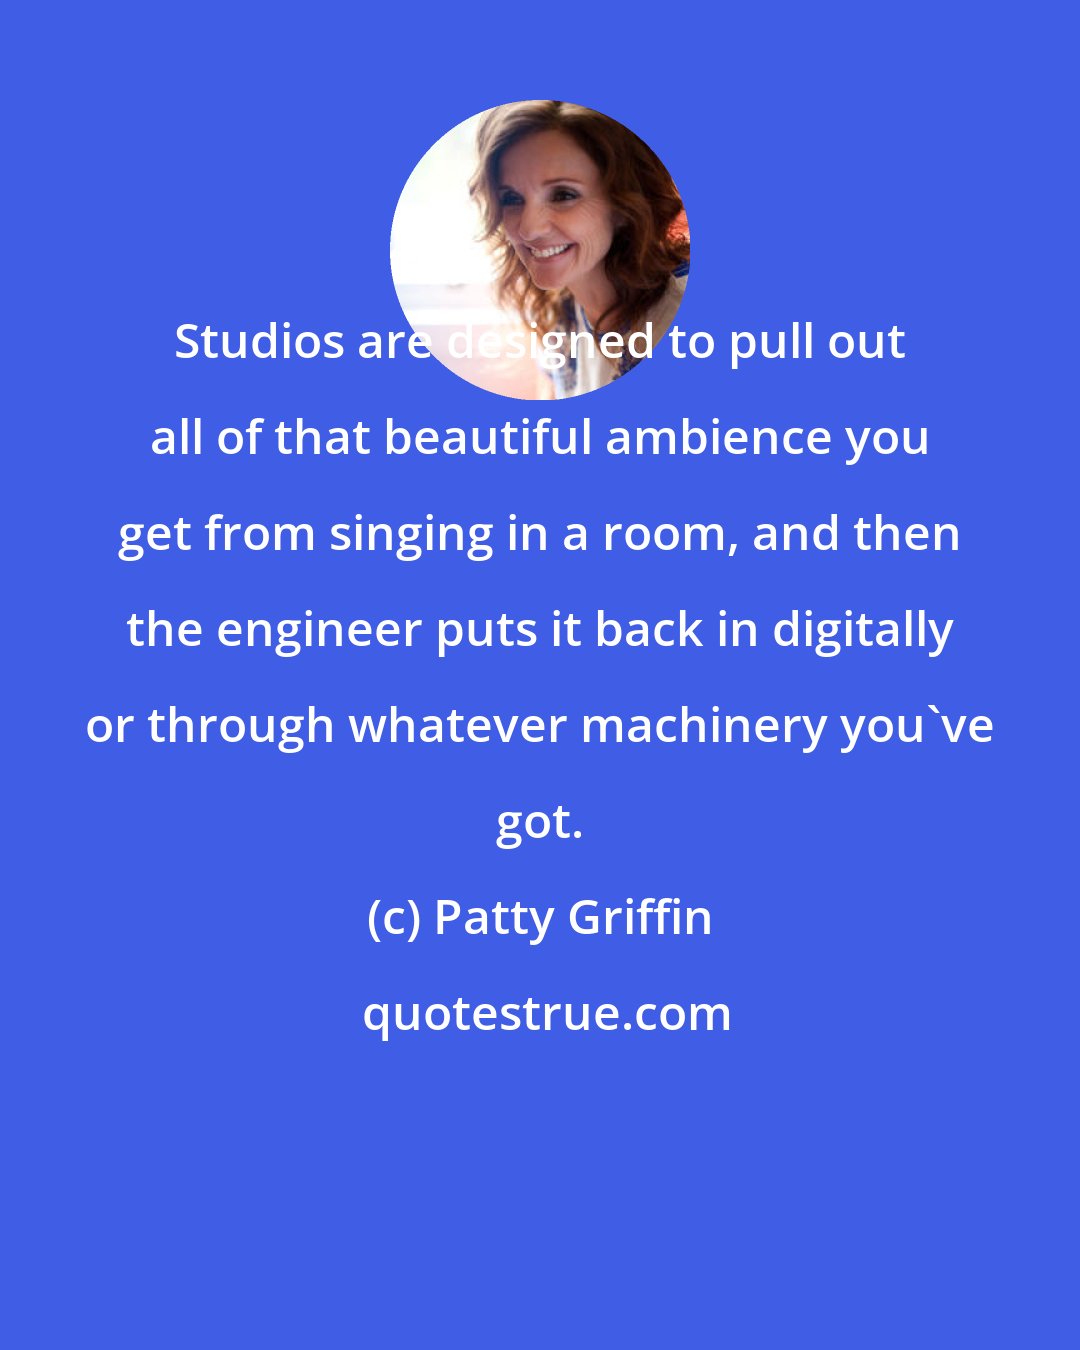 Patty Griffin: Studios are designed to pull out all of that beautiful ambience you get from singing in a room, and then the engineer puts it back in digitally or through whatever machinery you've got.